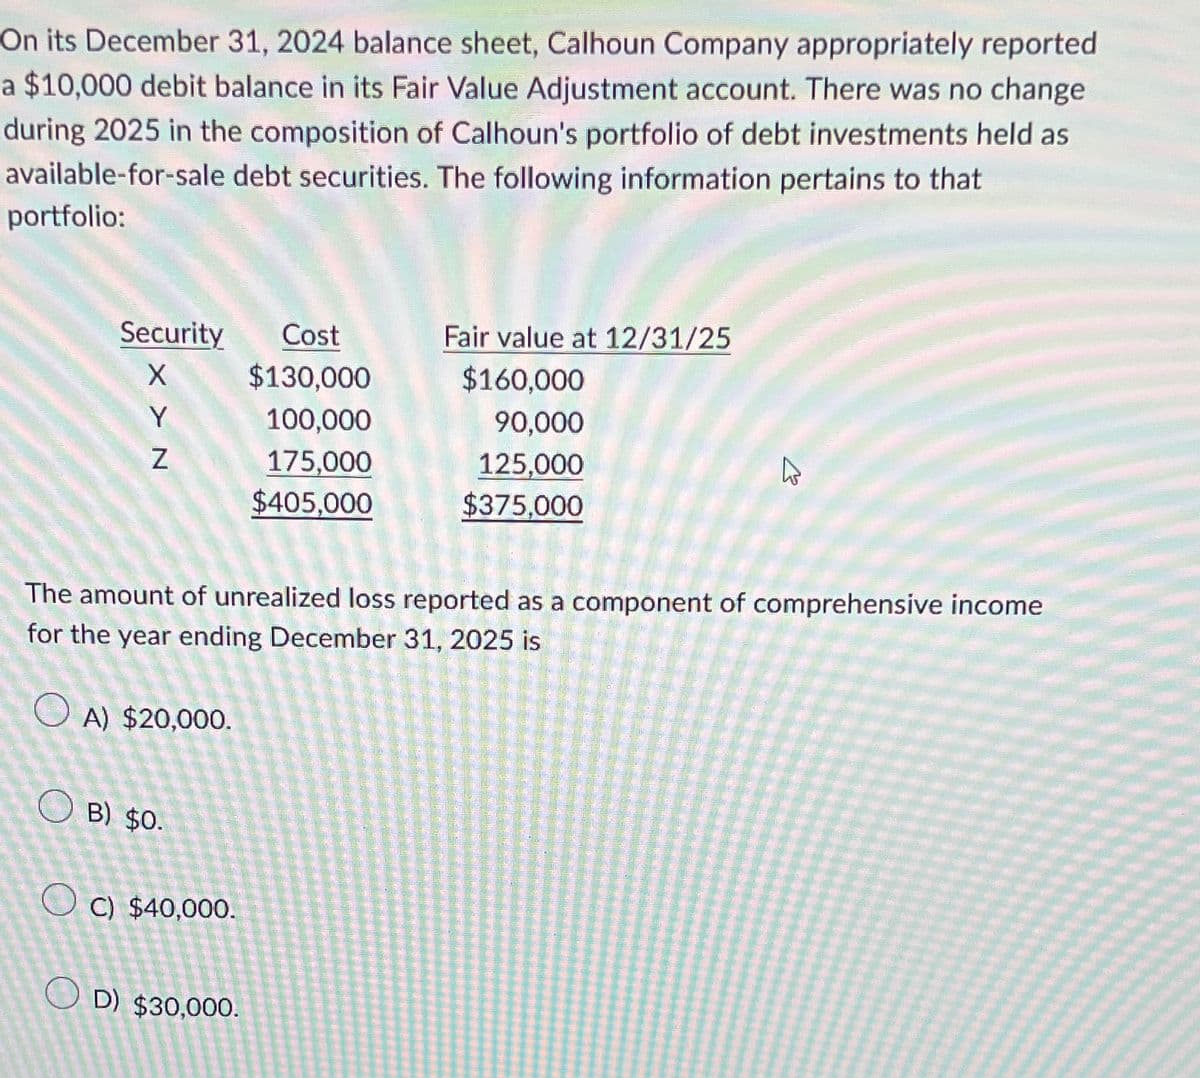 On its December 31, 2024 balance sheet, Calhoun Company appropriately reported
a $10,000 debit balance in its Fair Value Adjustment account. There was no change
during 2025 in the composition of Calhoun's portfolio of debt investments held as
available-for-sale debt securities. The following information pertains to that
portfolio:
Security
XY N
B) $0.
OC) $40,000.
Cost
$130,000
OD) $30,000.
100,000
175,000
$405,000
The amount of unrealized loss reported as a component of comprehensive income
for the year ending December 31, 2025 is
OA) $20,000.
Fair value at 12/31/25
$160,000
90,000
125,000
$375,000